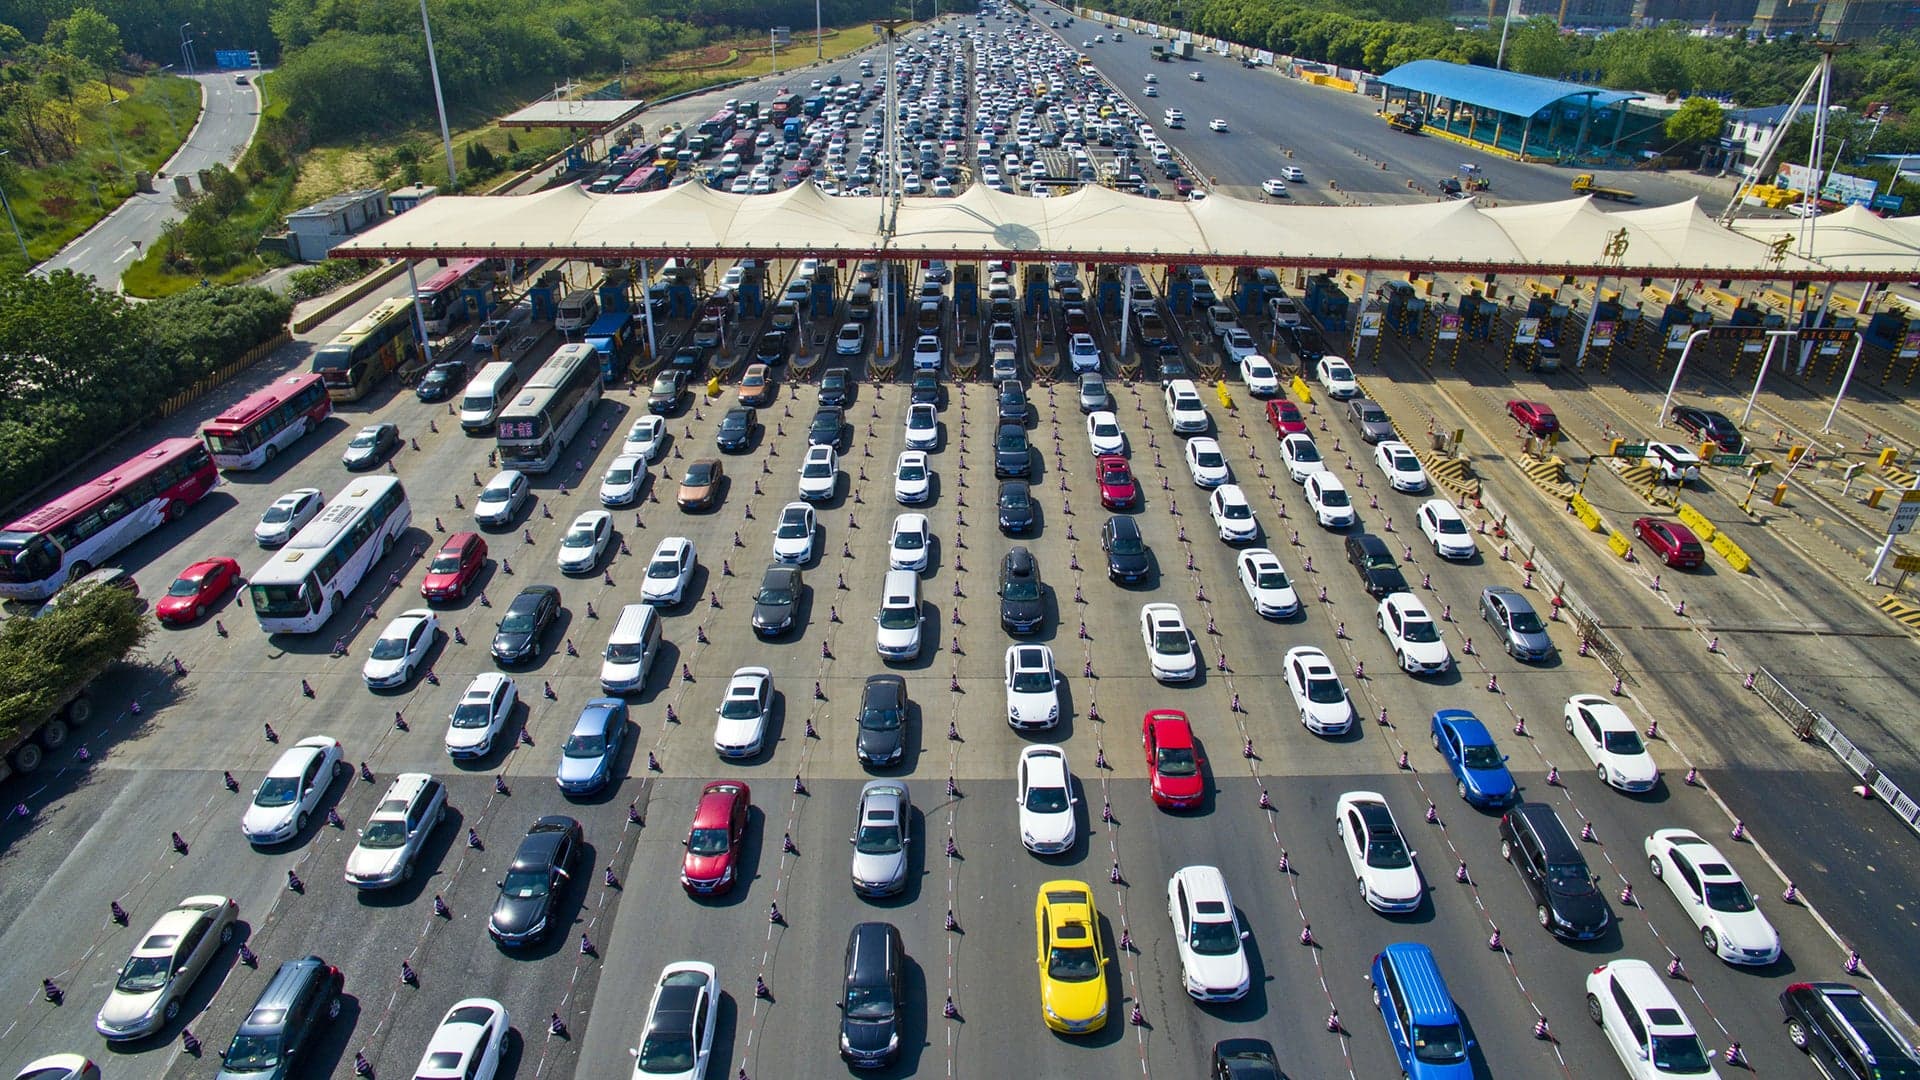 Even Small Numbers of Self-Driving Cars Could Almost Eliminate Traffic Jams, Study Says